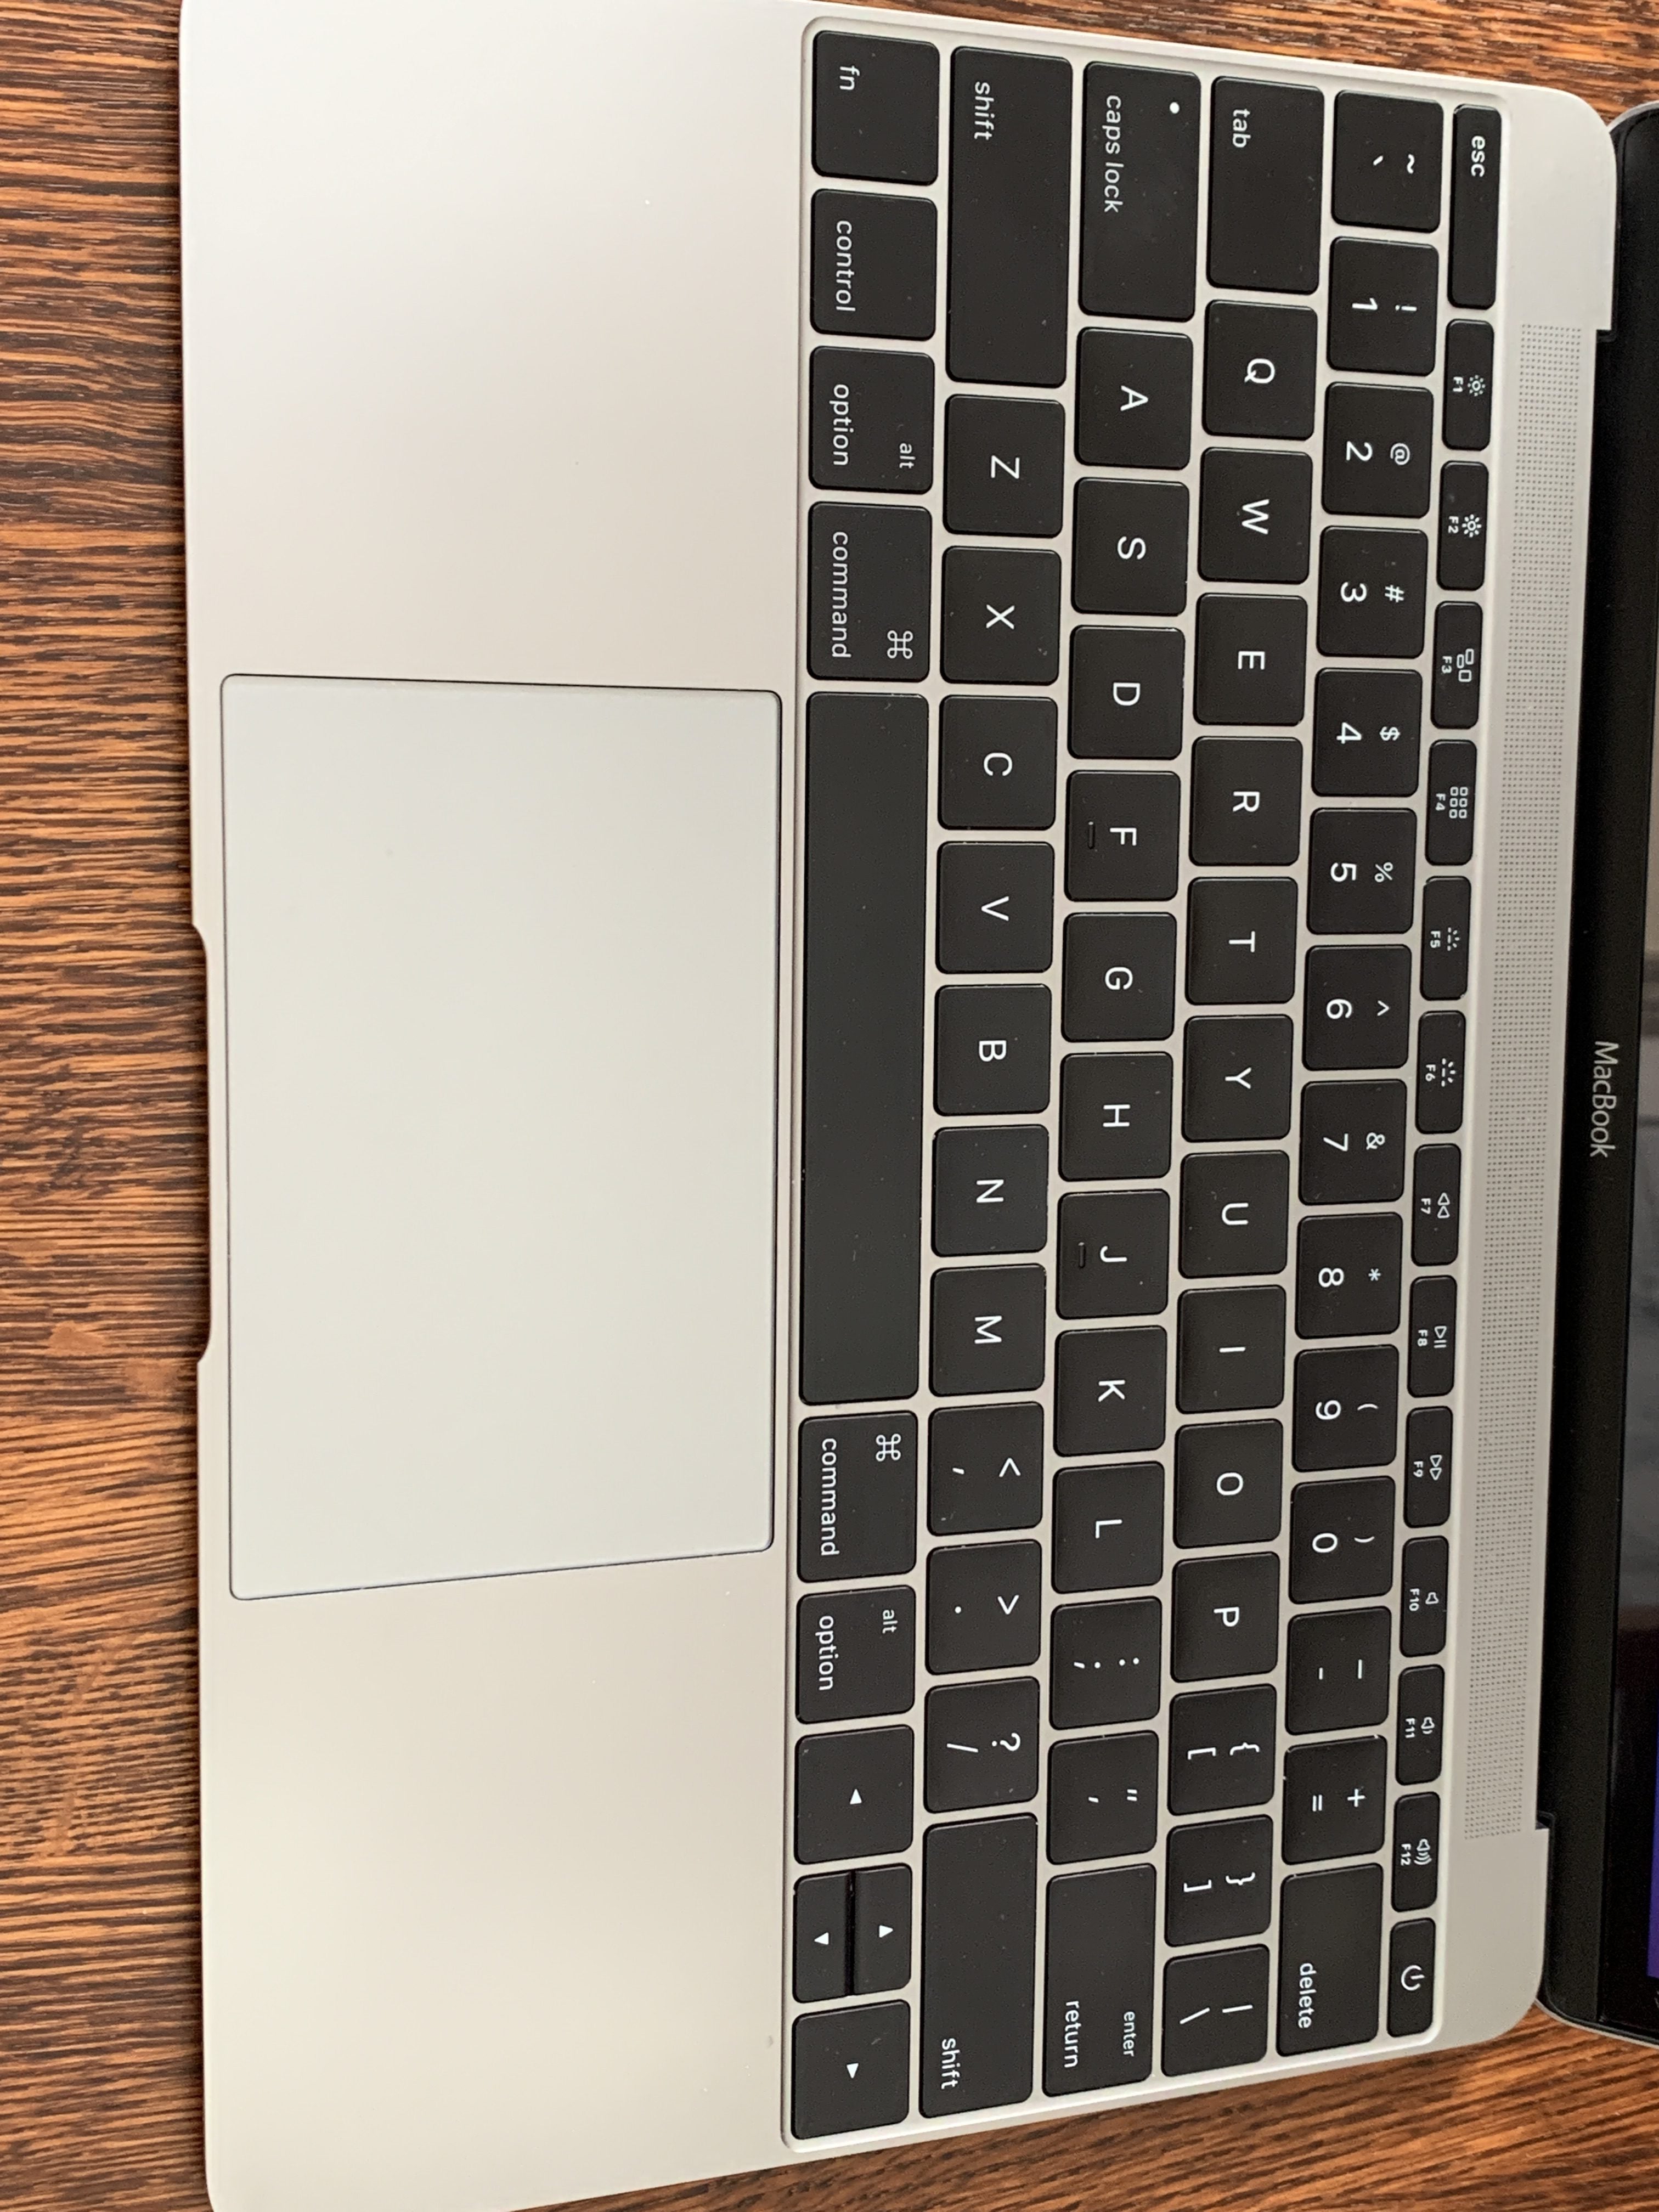 Macbook Retina 12 Inch Early 16 Space Grey Price Drop For Sale Redflagdeals Com Forums